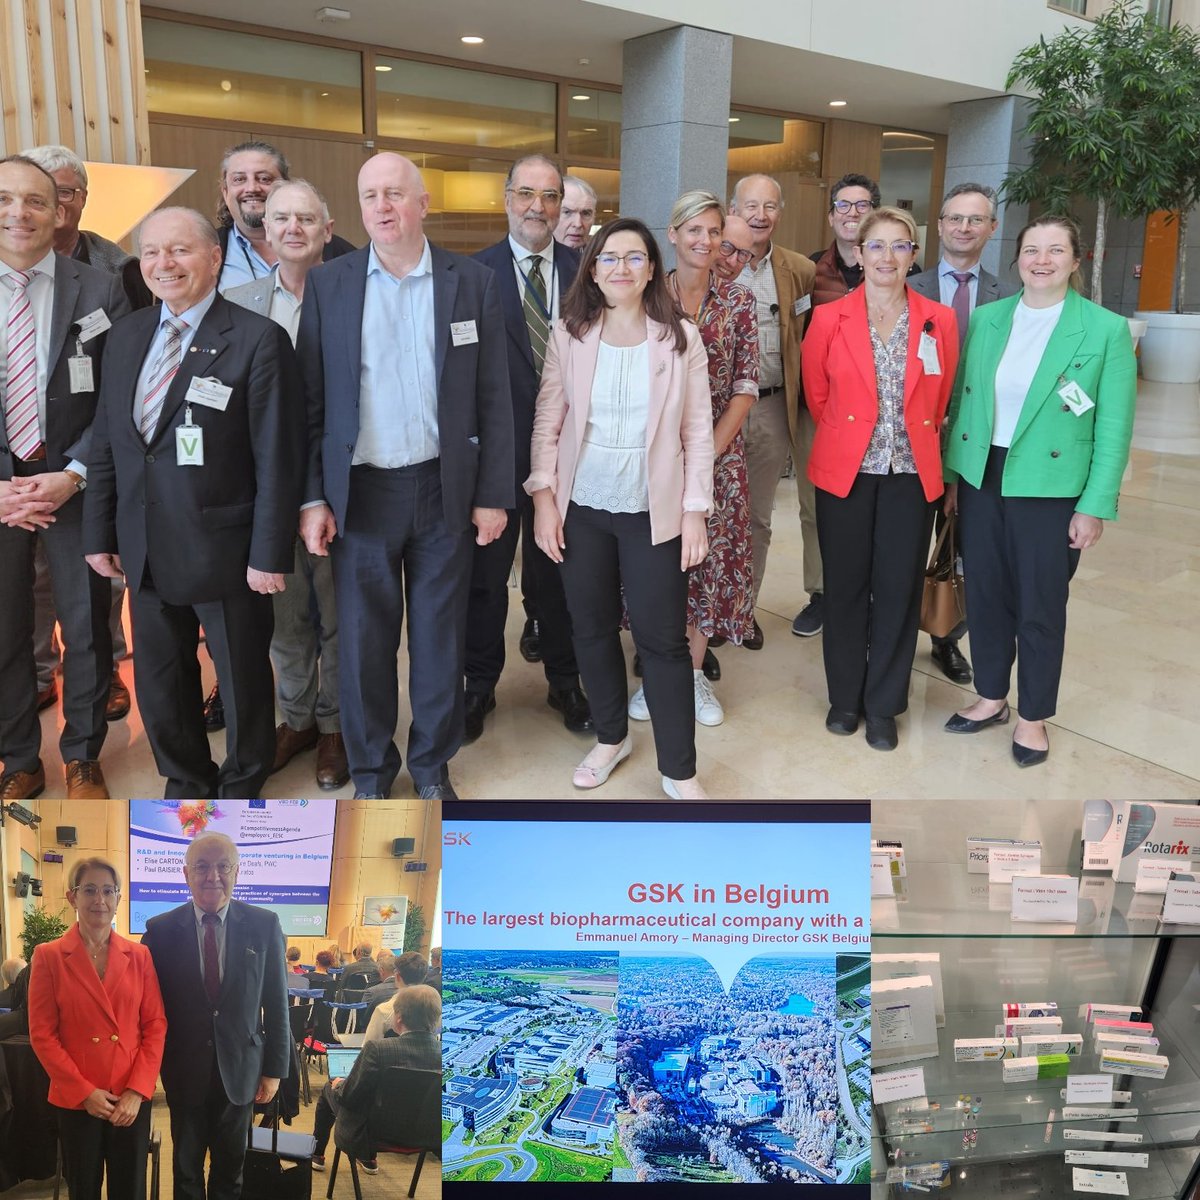 Excellent @employers_EESC meeting on drawing a #CompetitvenessAgenda for #EU. We visited 🌏 world's largest 💉vaccines producer @GSK in #Wavre, who will impact postitively the health of 2.5 bln peolple in the next 10 years! Business is key for #prosperity and shall be repsected🙏